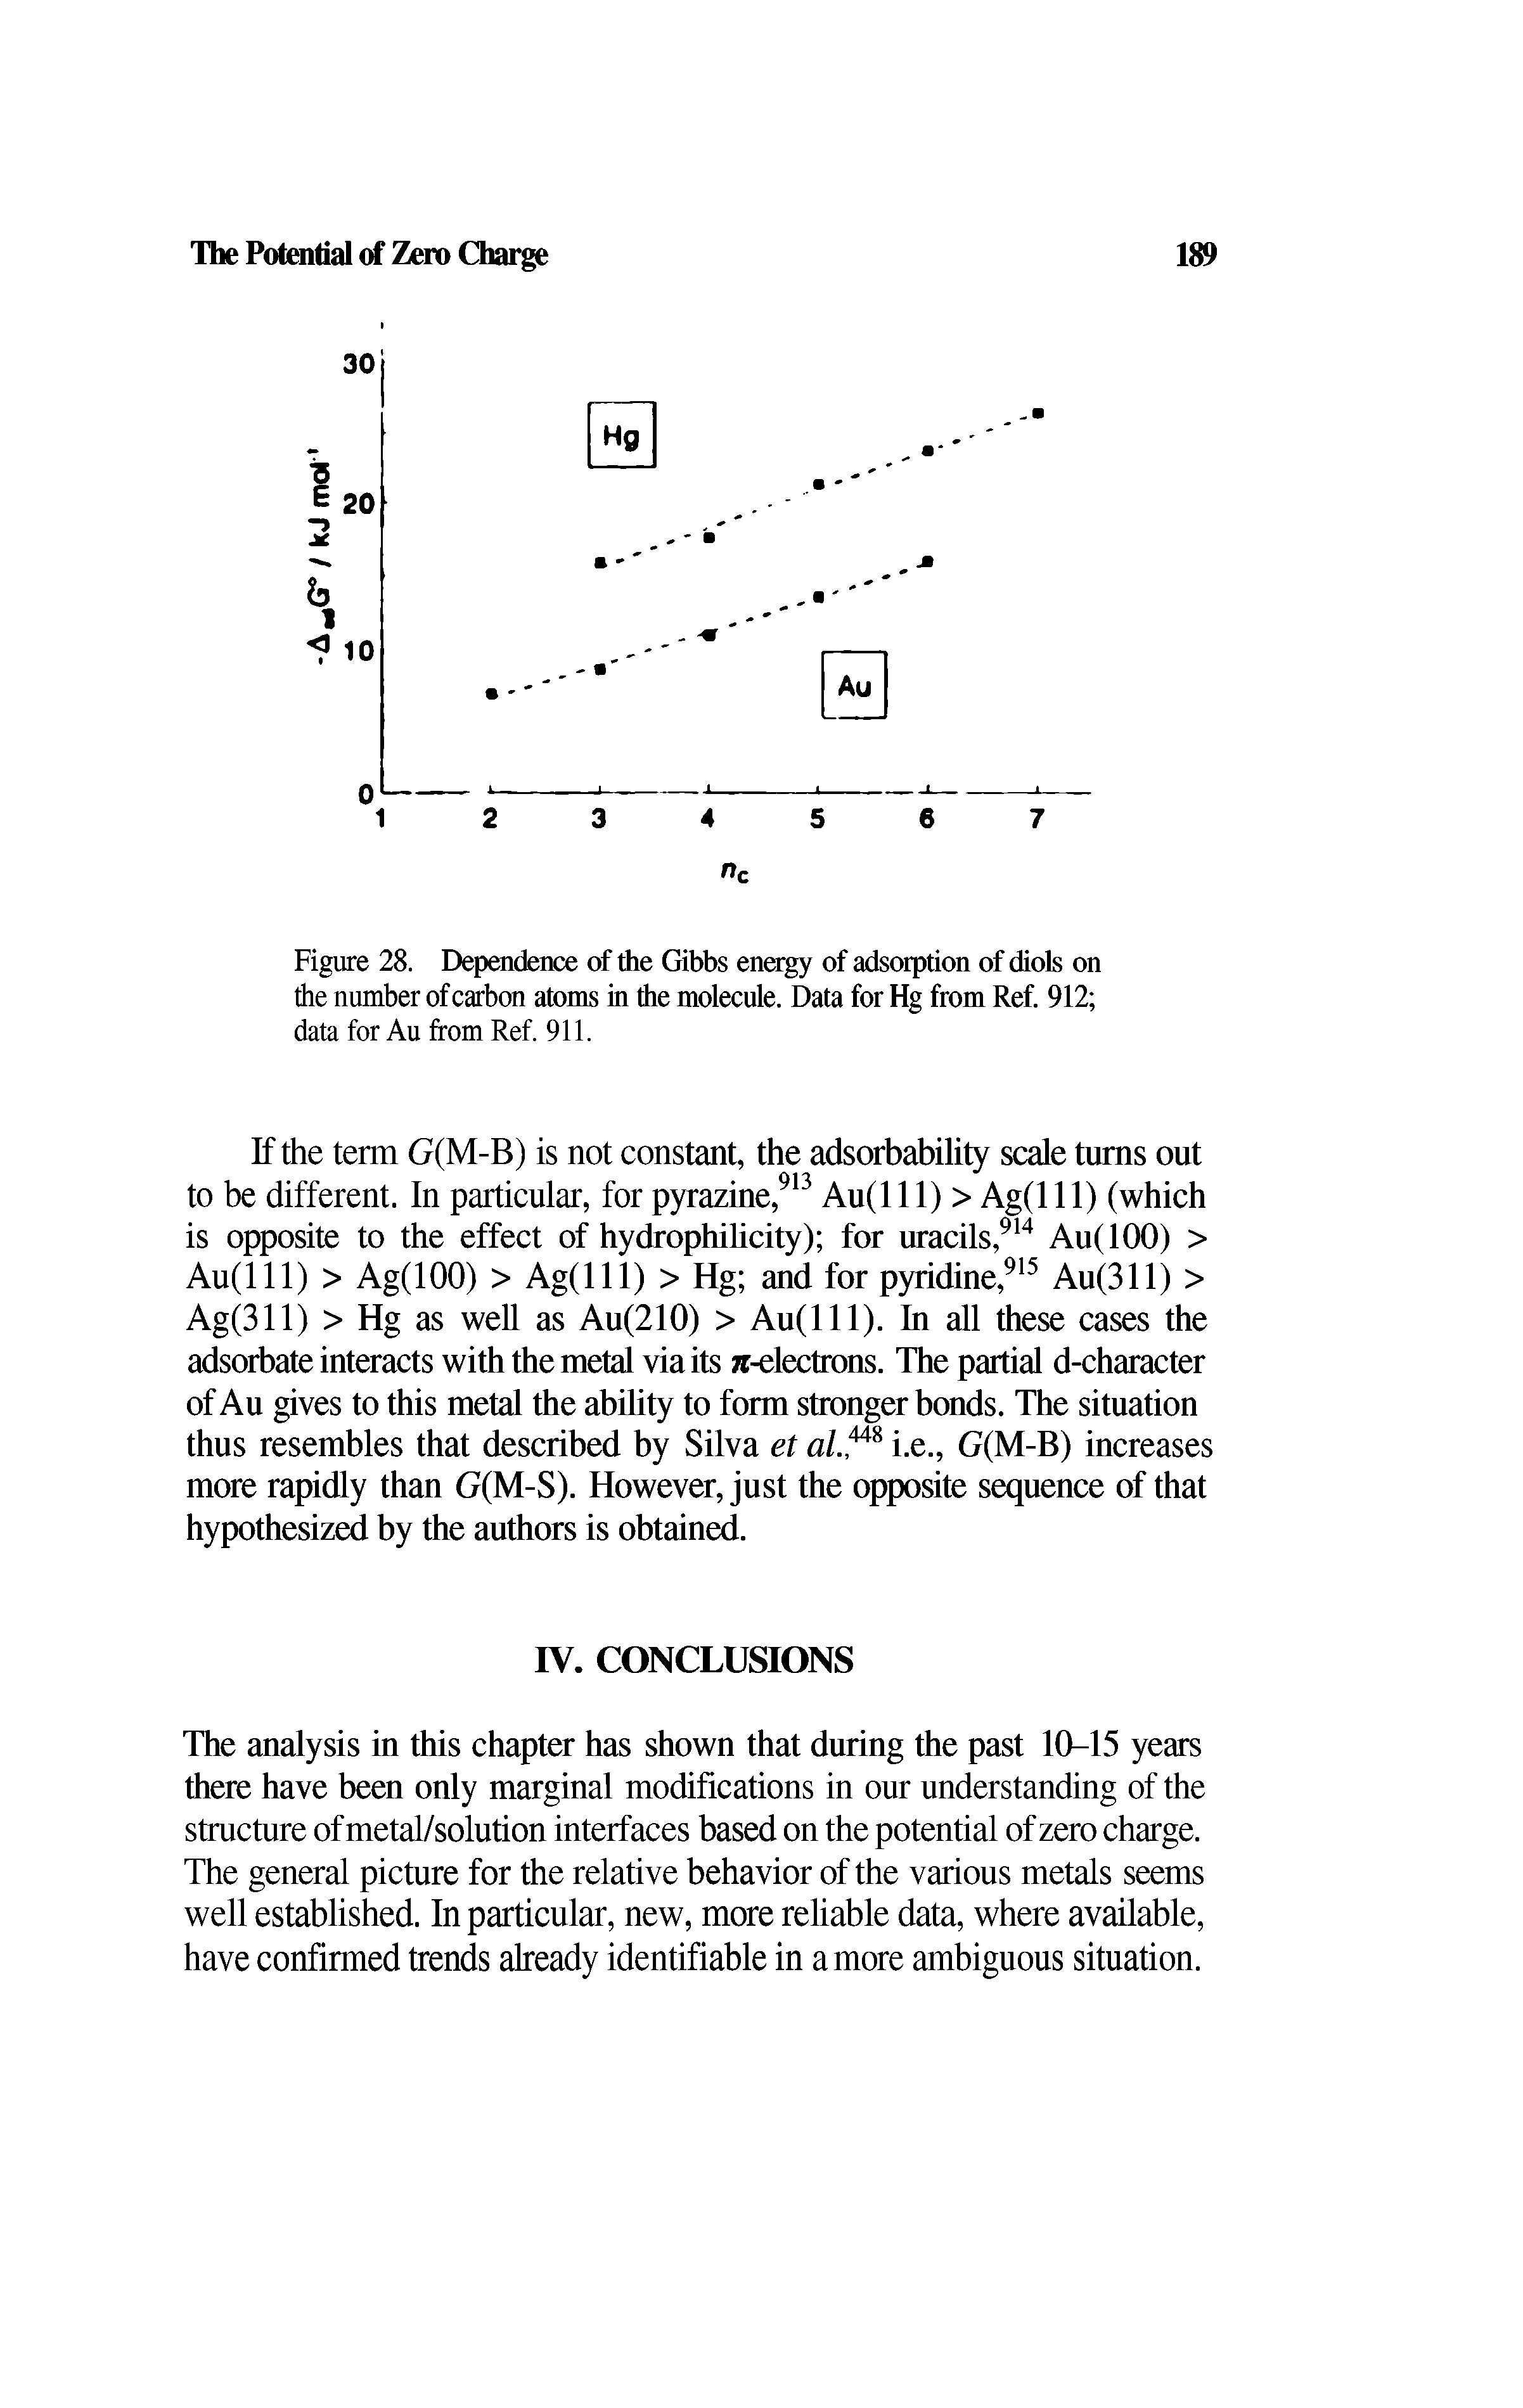 Figure 28. Dependence of the Gibbs energy of adsorption of diols on the number of carbon atoms in the molecule. Data for Hg from Ref. 912 data for Au from Ref. 911.